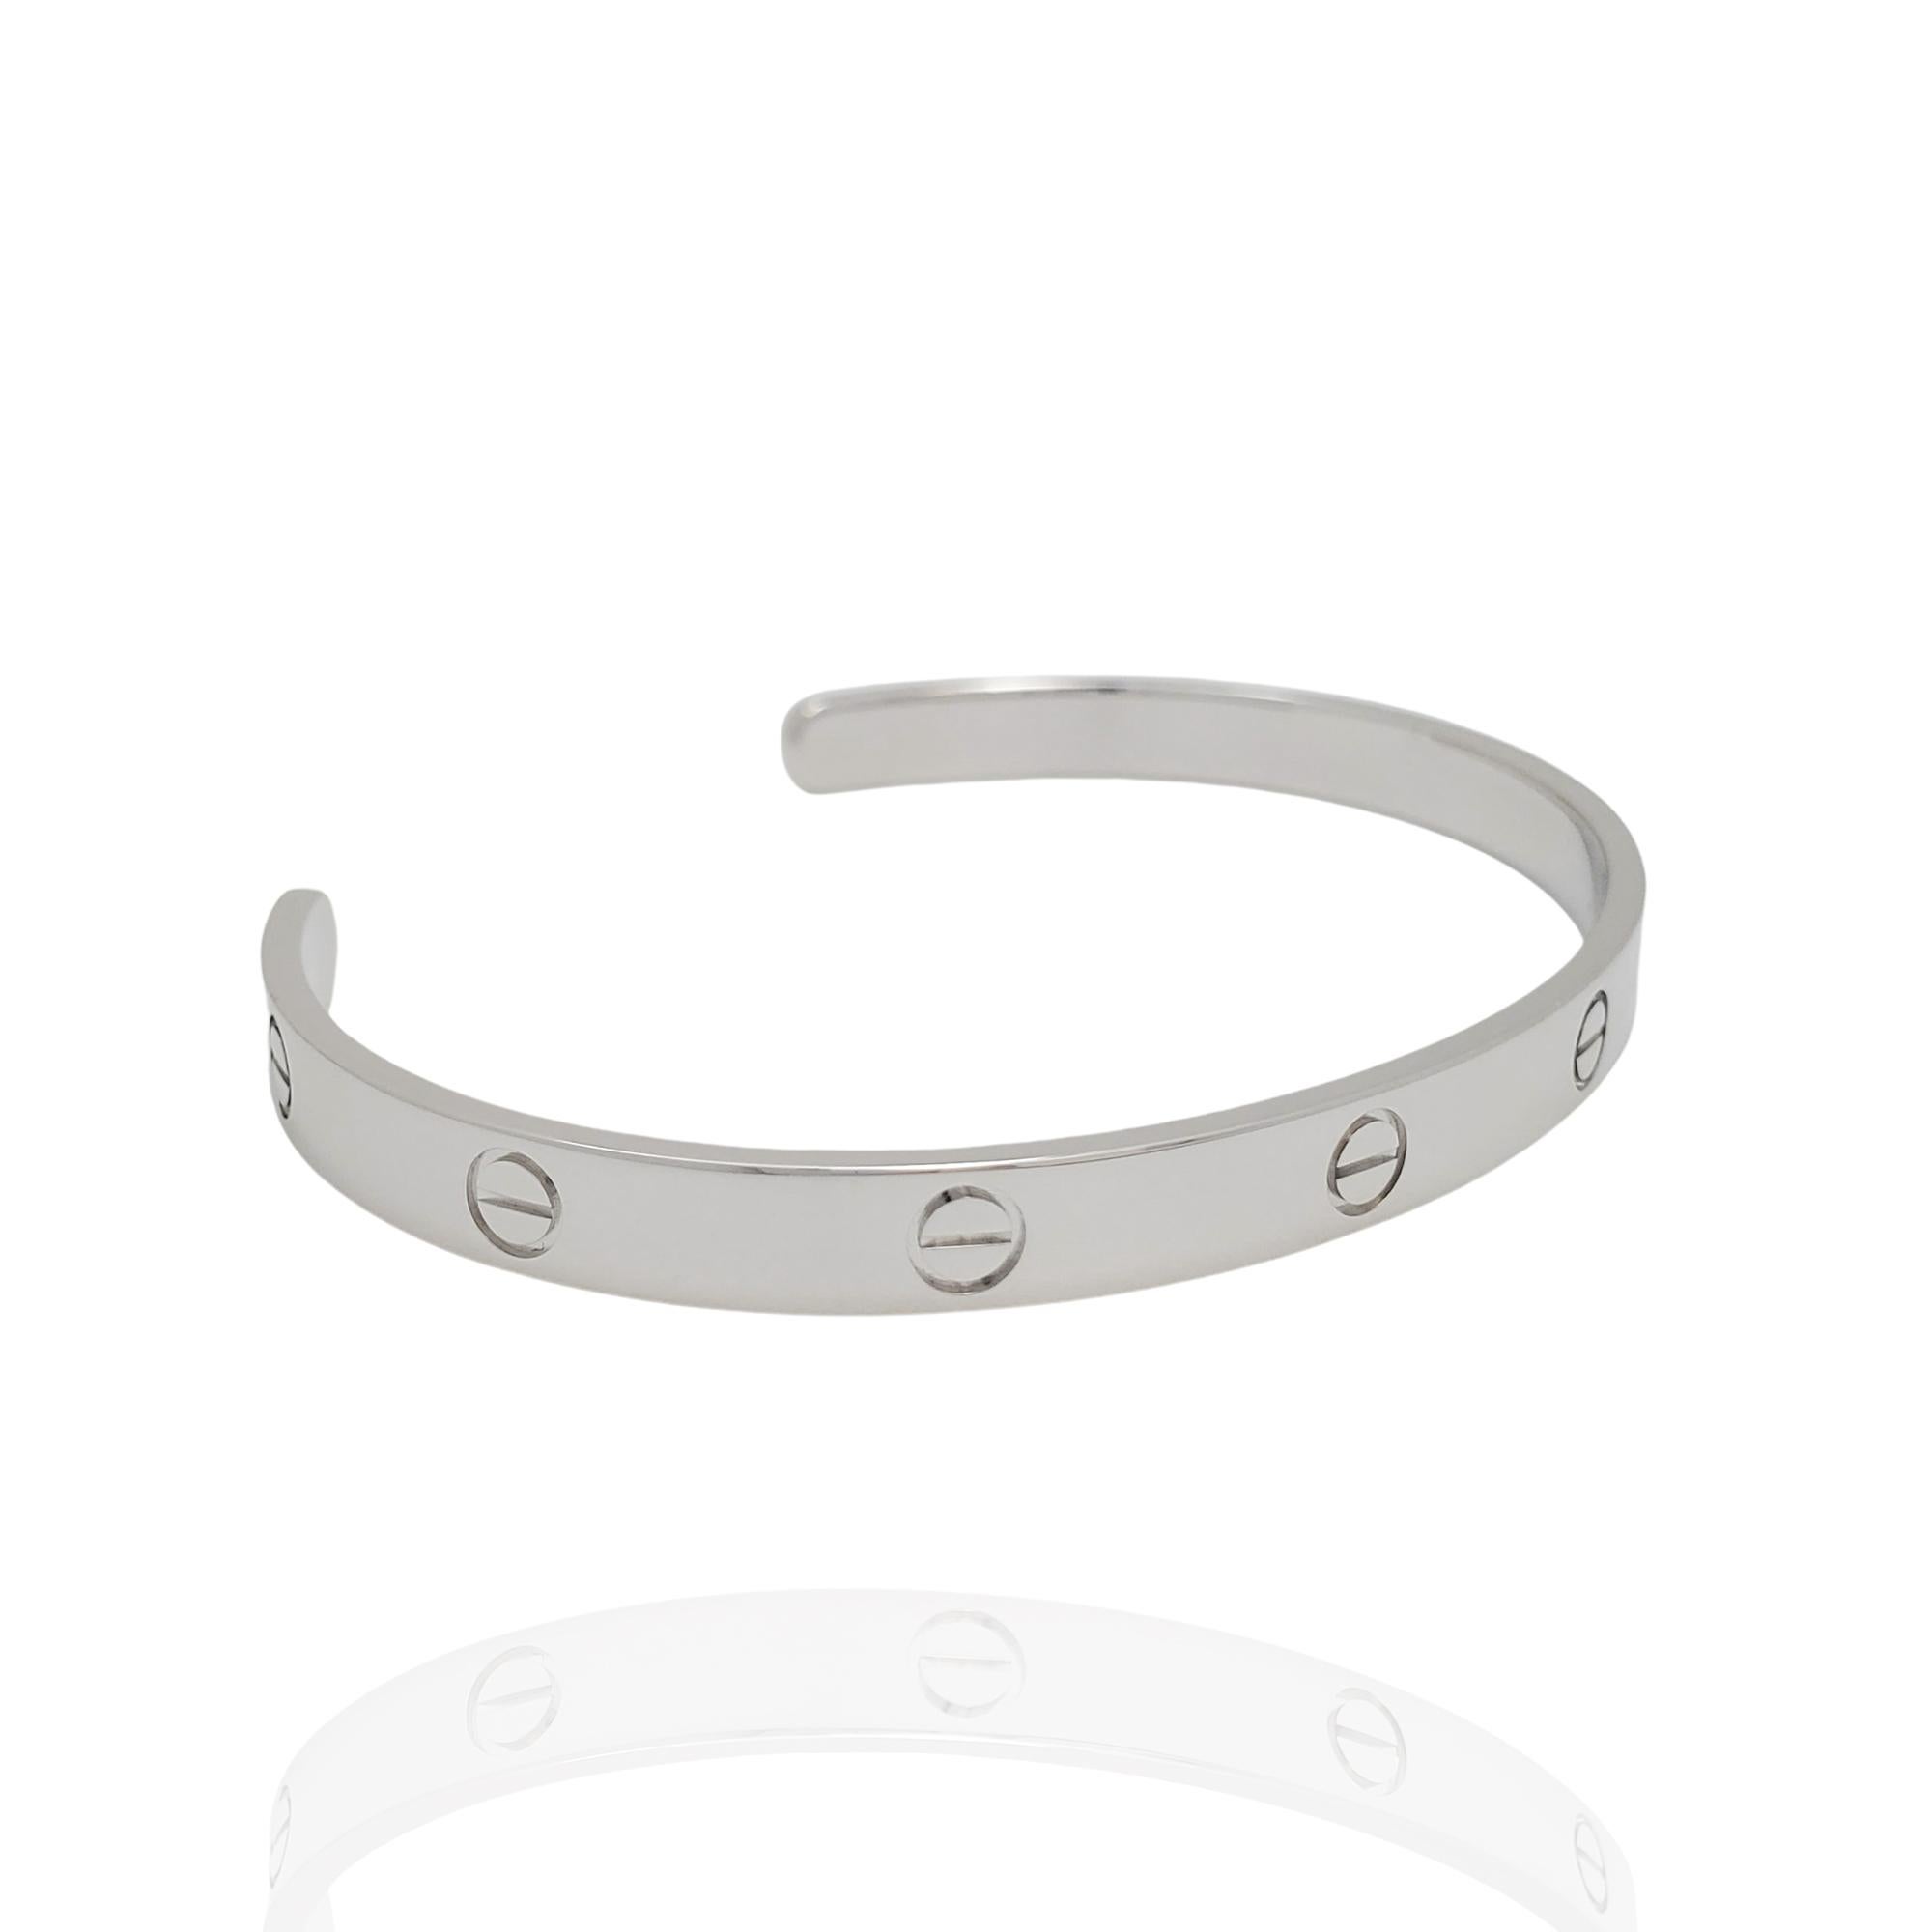 Authentic Cartier 'Love' open cuff bracelet crafted in 18 karat white gold. Signed Cartier, 750, 21, with serial number and hallmarks. The bracelet is presented with the original box and papers. CIRCA 2000s.

Brand: Cartier
Collection: Love
Metal: